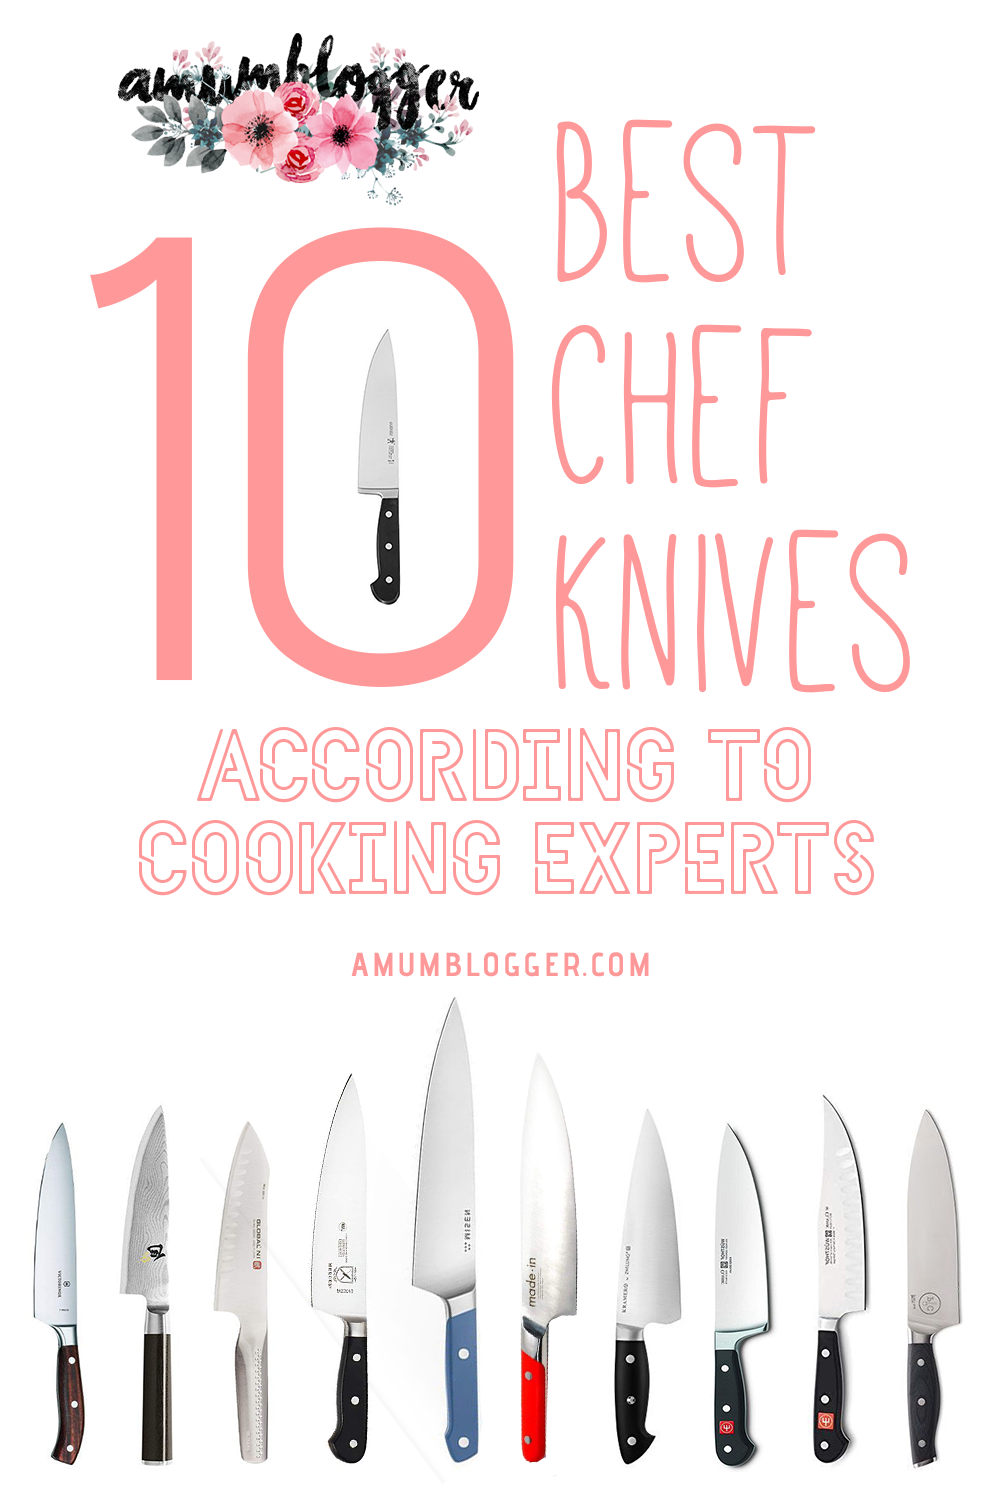 10 Best Chef's Knives, According to Cooking Experts